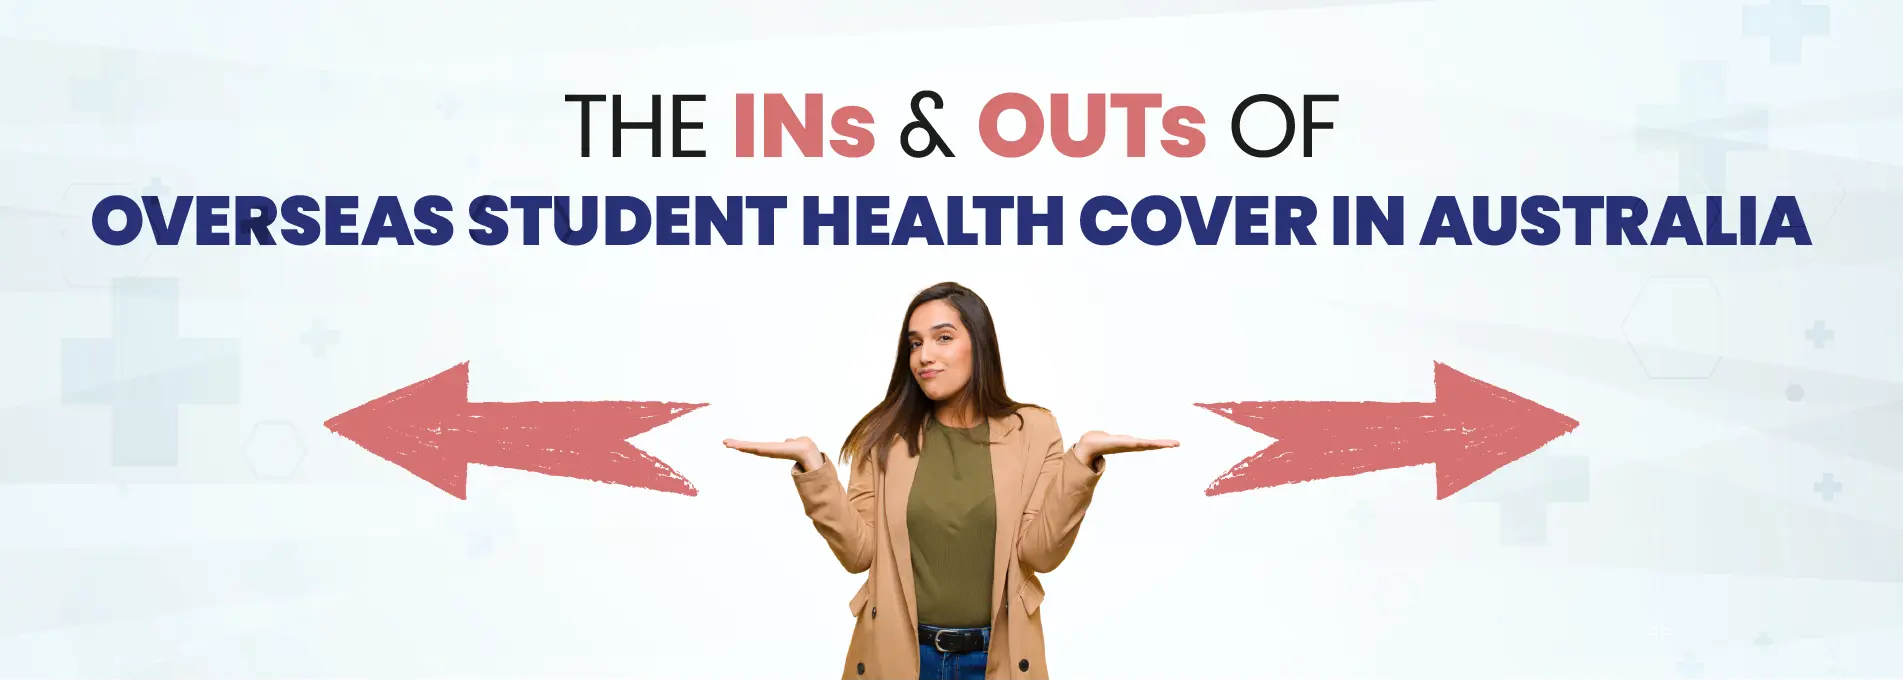 The Ins and Outs of Overseas Student Health Cover in Australia